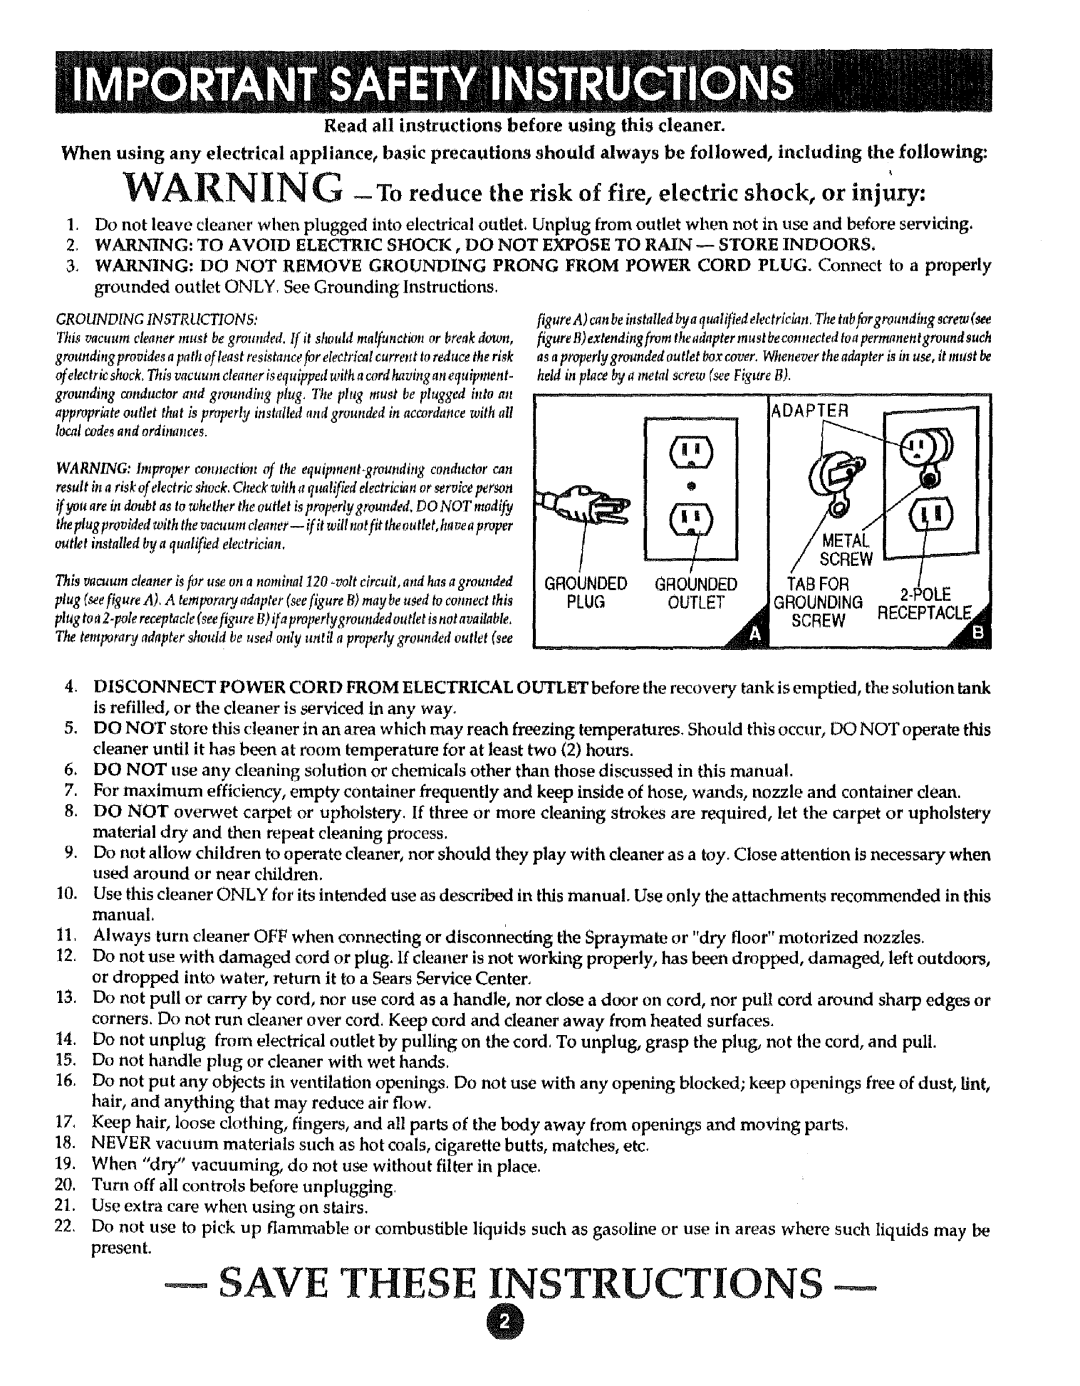 Sears 175, 8690290 manual Save These Instructions, WARNING -To reduce the risk of fire, electric shock, or injury 